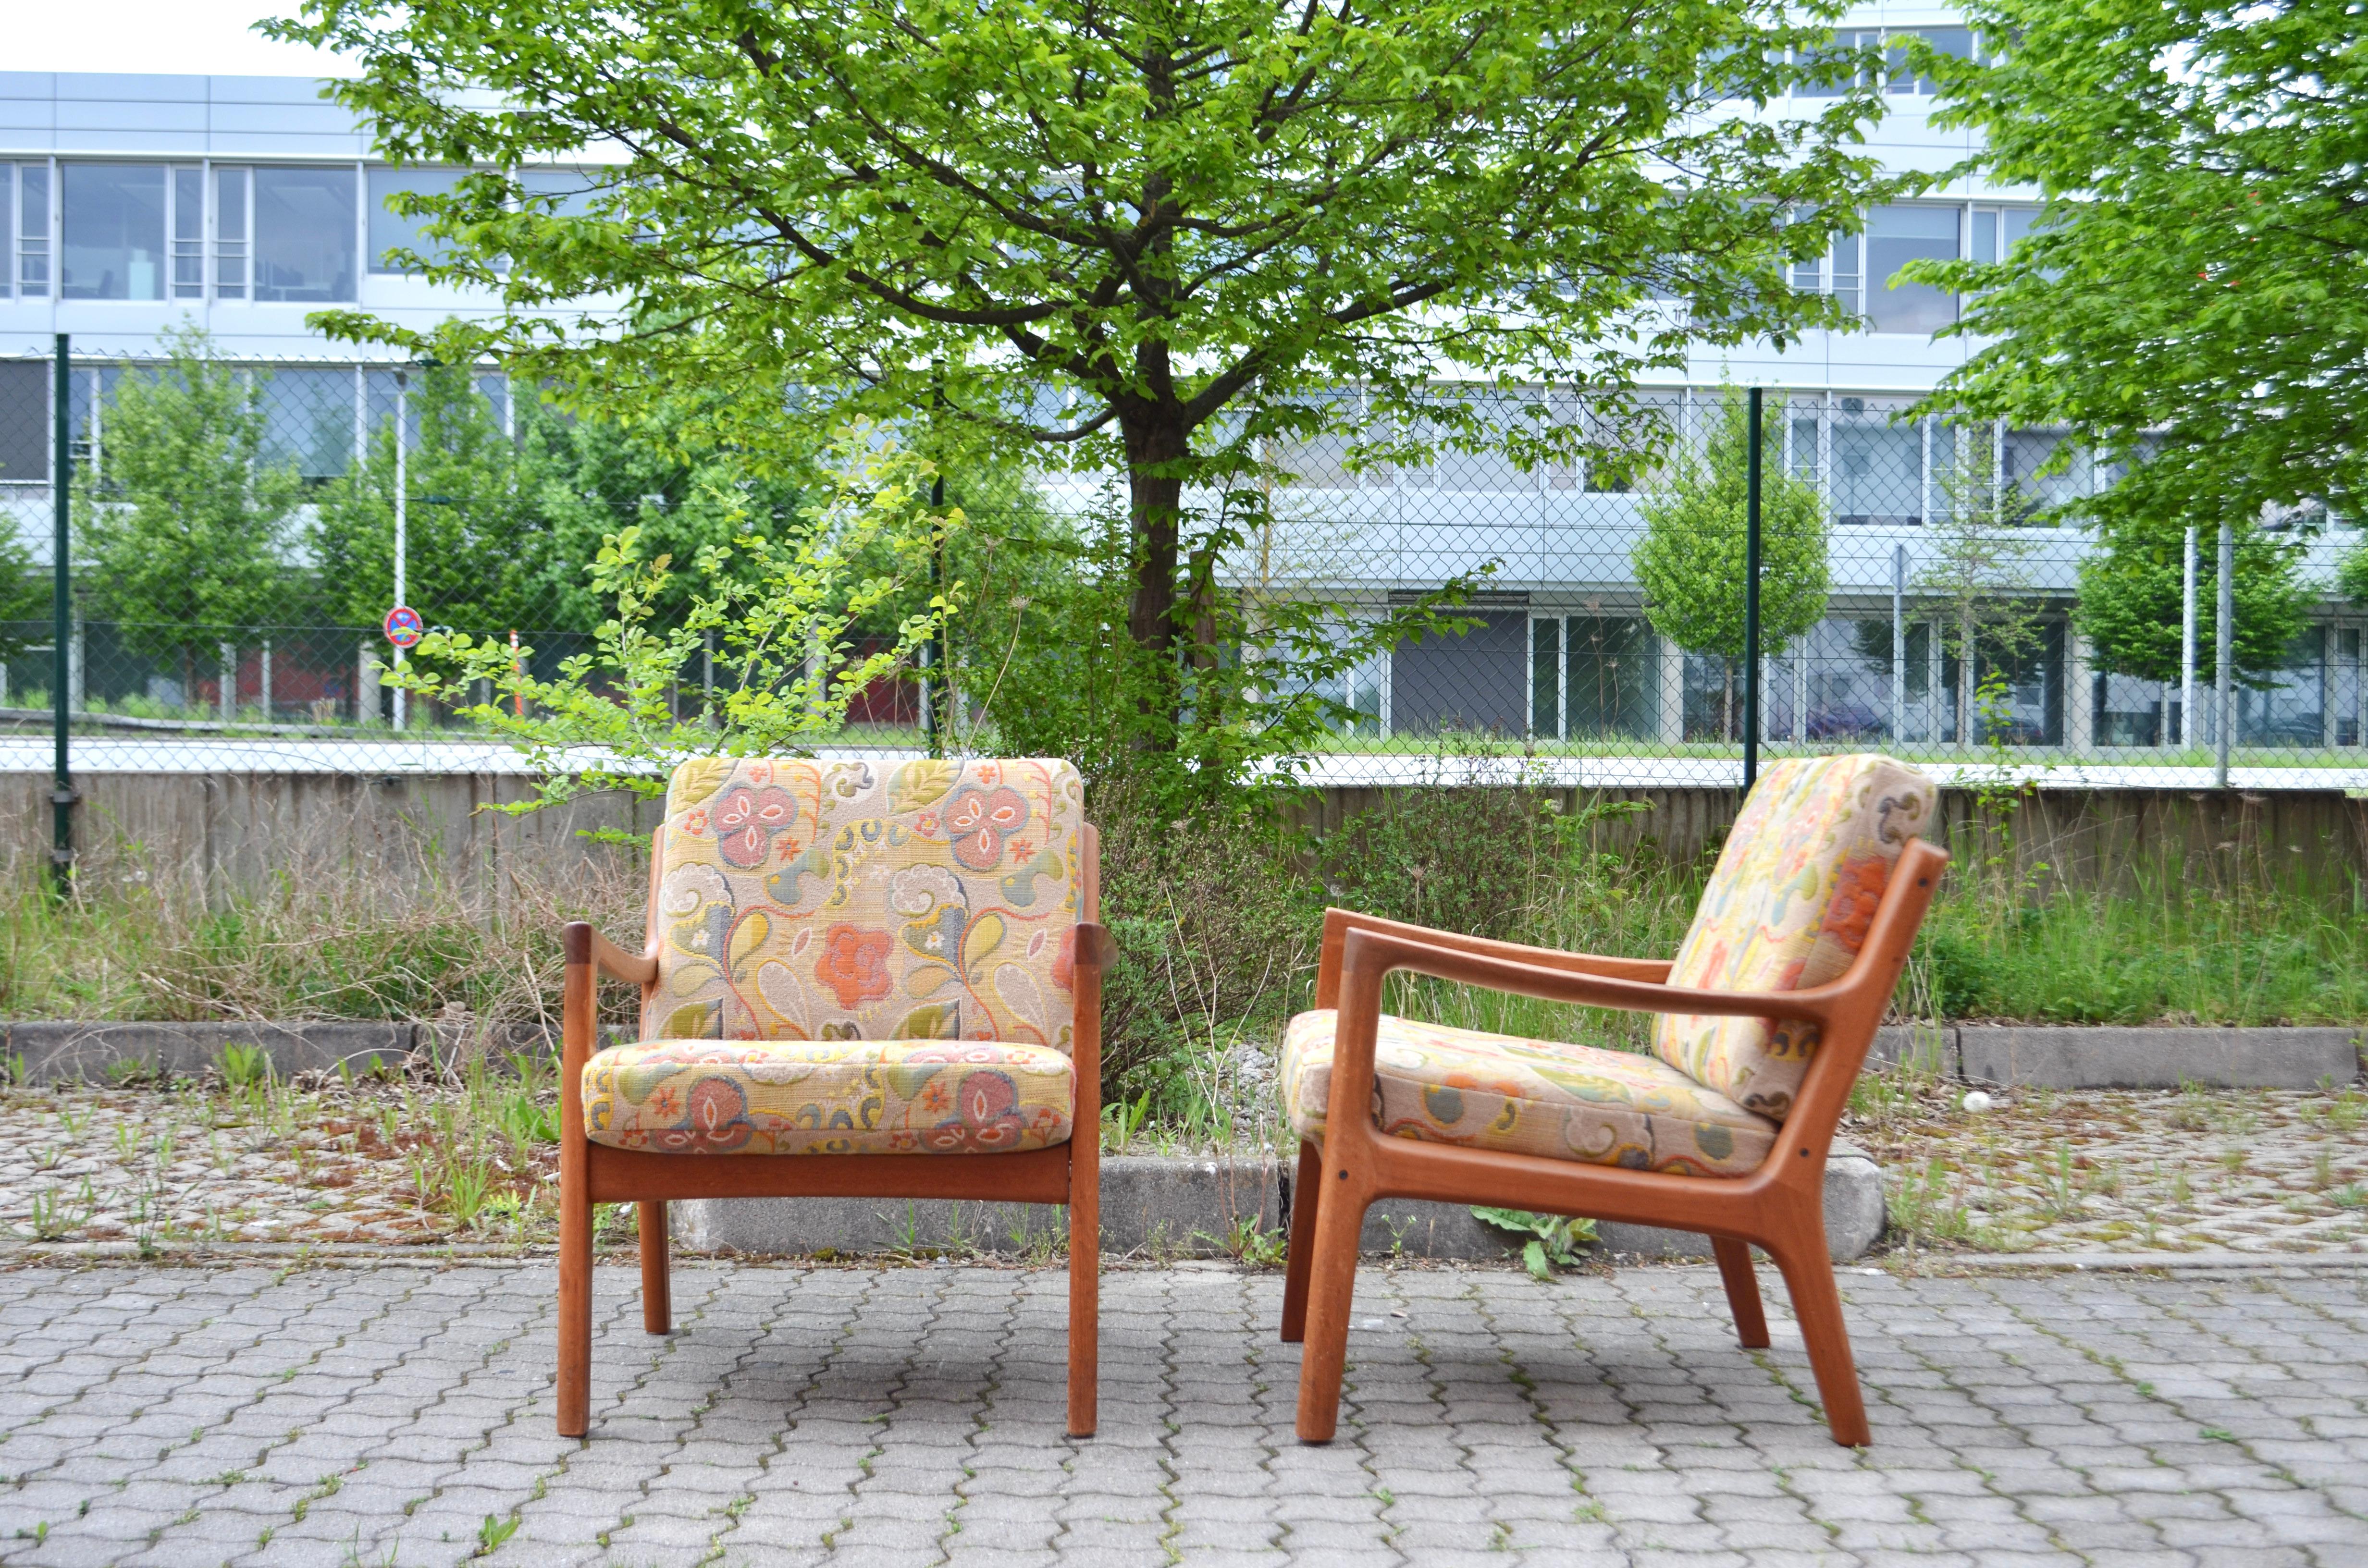 Ole Wanscher  Modell Senator Easy chair in teak wood.
Produced by France & Son / France Daverkosen
The fabric is made of wool and it has a unique flower pattern which made it  so special.
Great condition.
Set of 2.